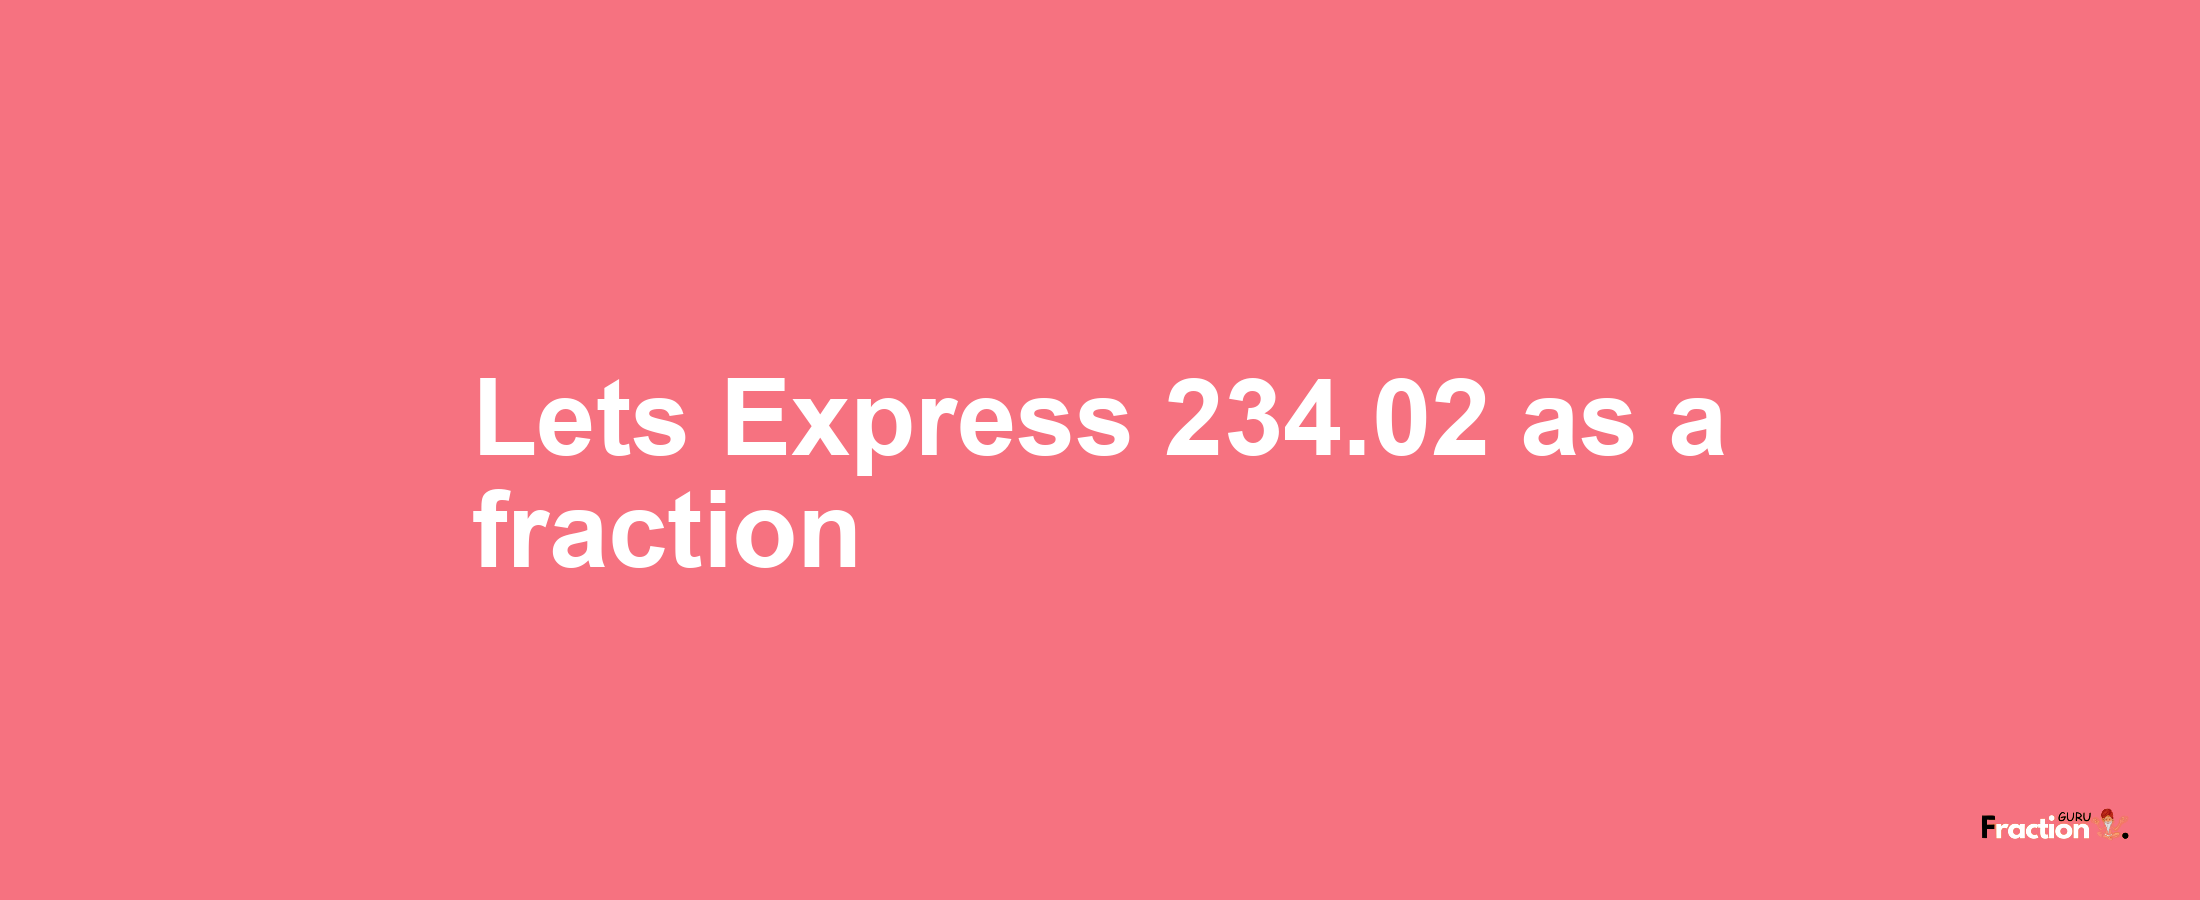 Lets Express 234.02 as afraction